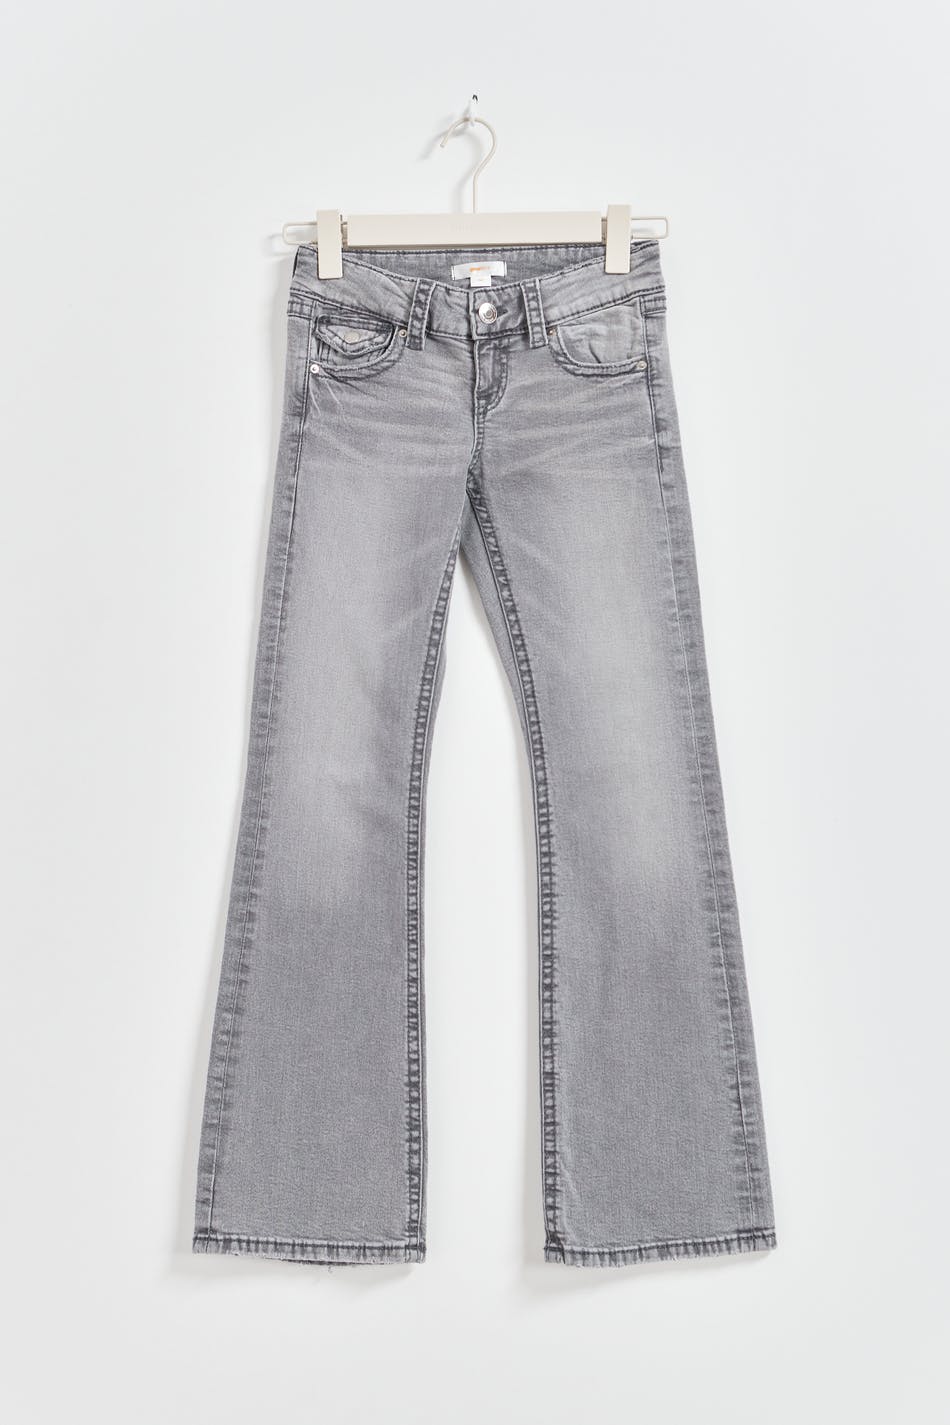 Gina Tricot - Chunky flare tall jeans - wide jeans - Grey - 152 - Female